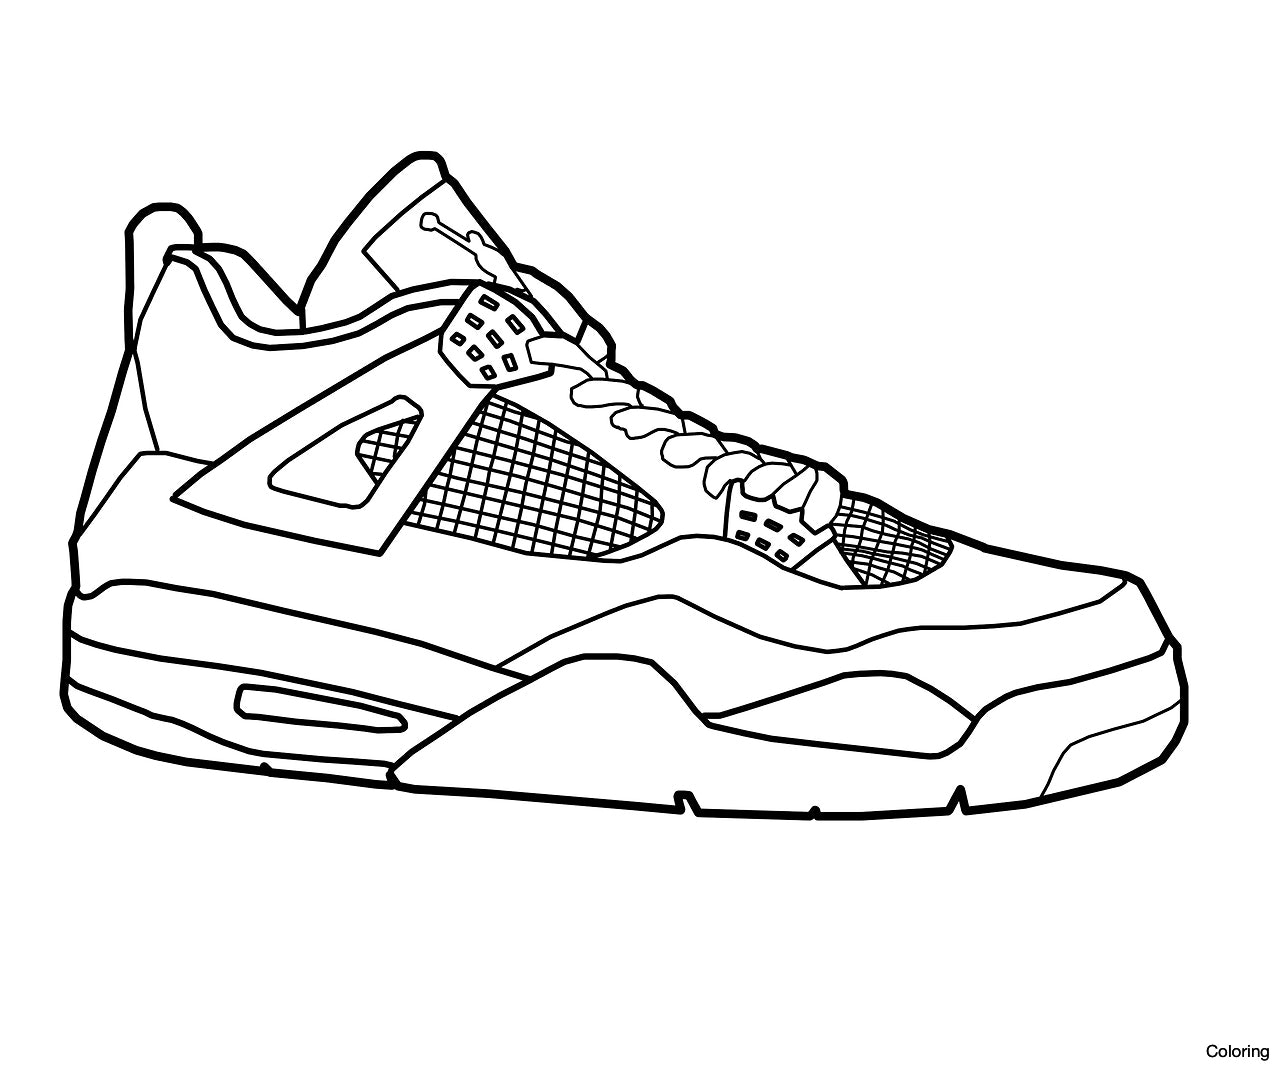 Nike Coloring Pages at Free printable colorings